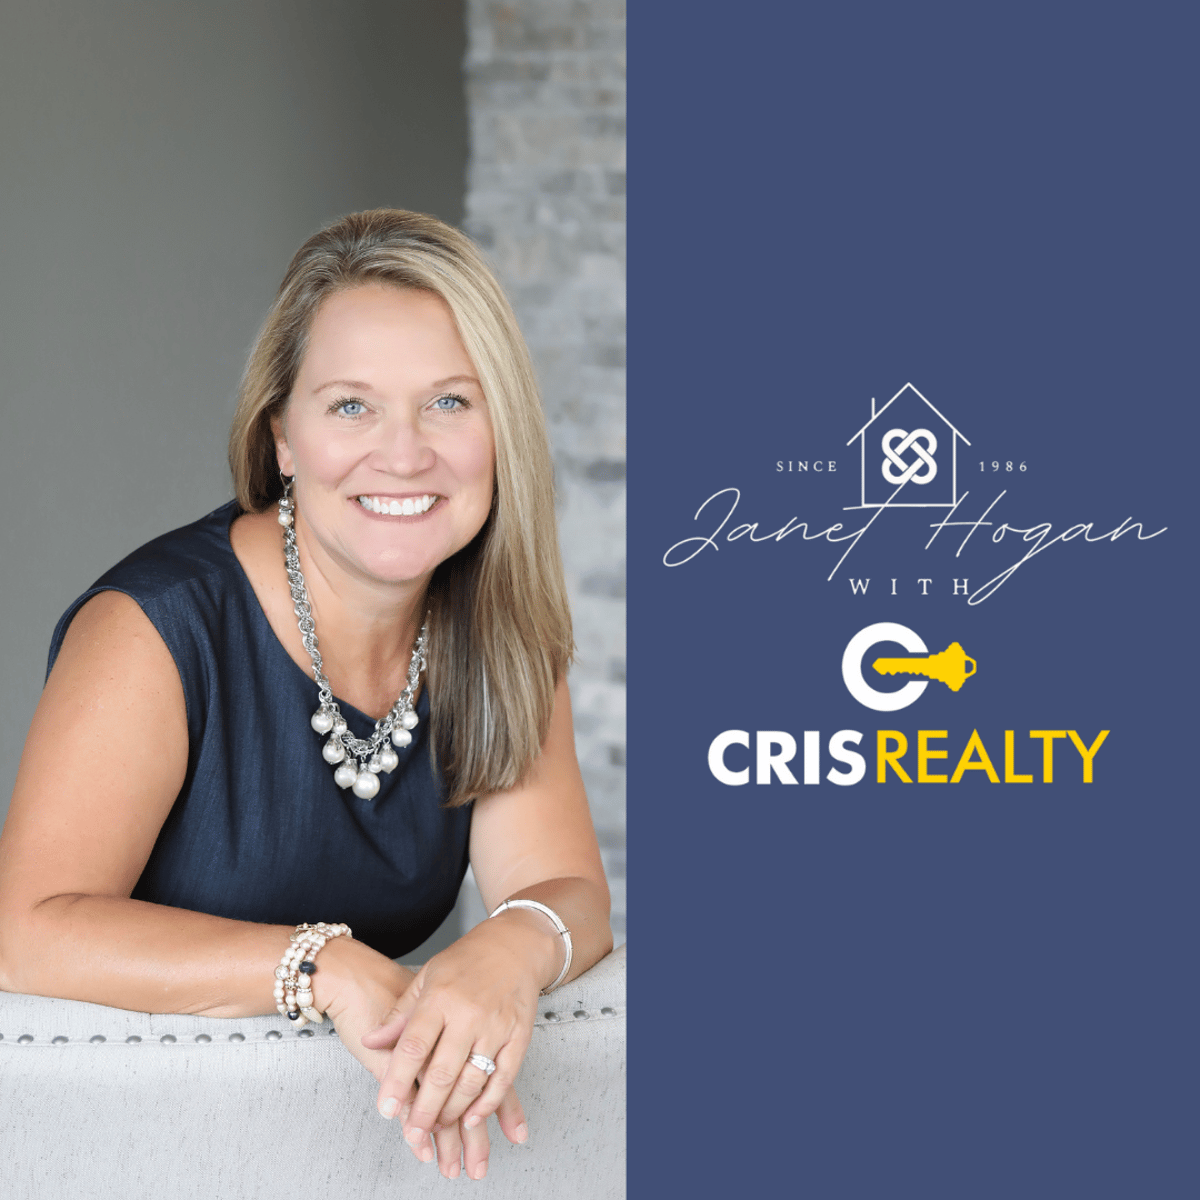 About - Janet Hogan Cris Realty